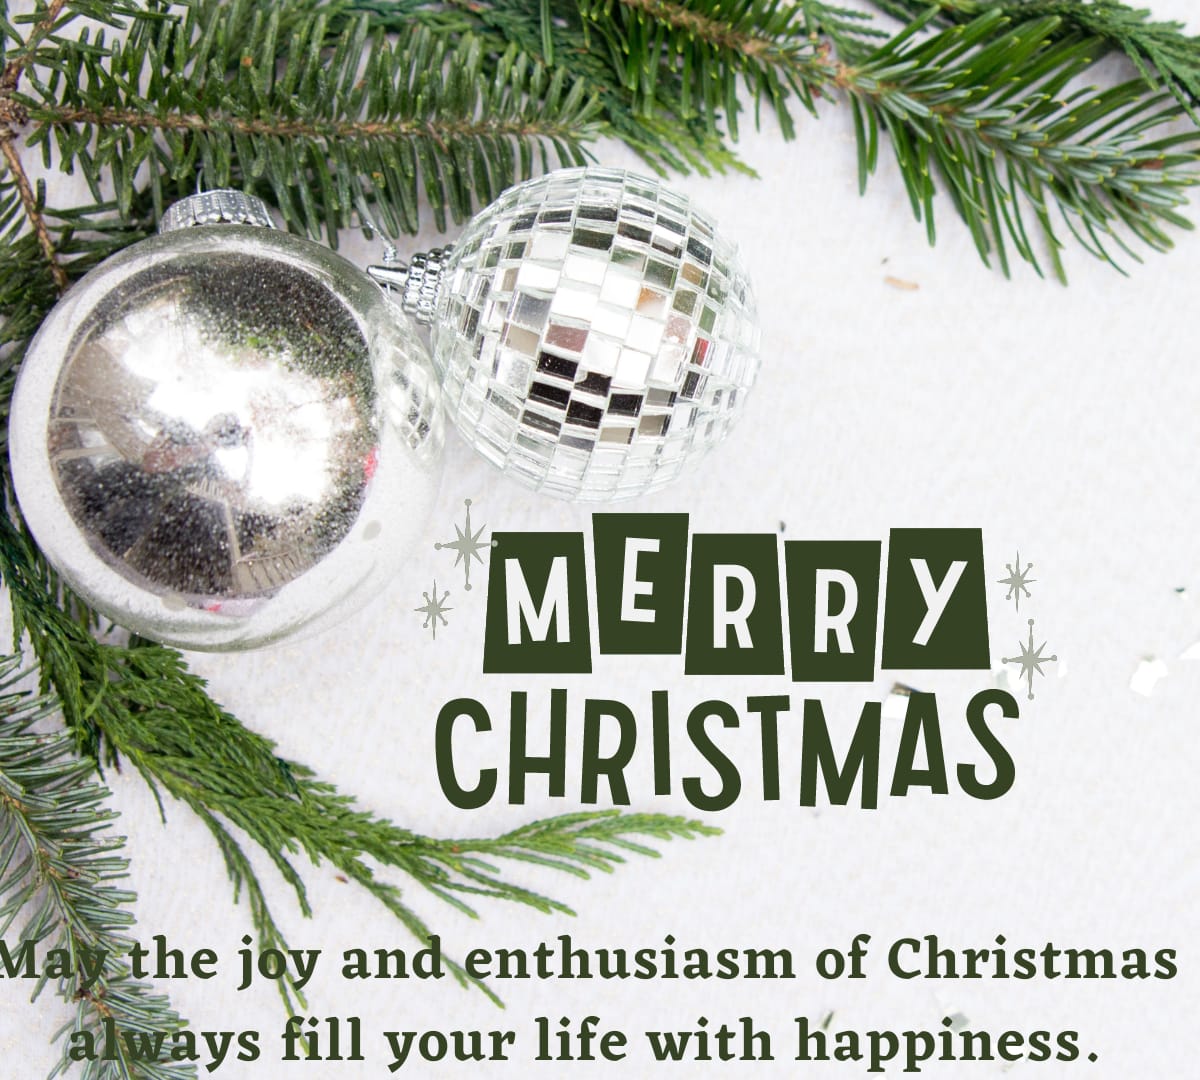 Merry Christmas greetings message for girlfriend